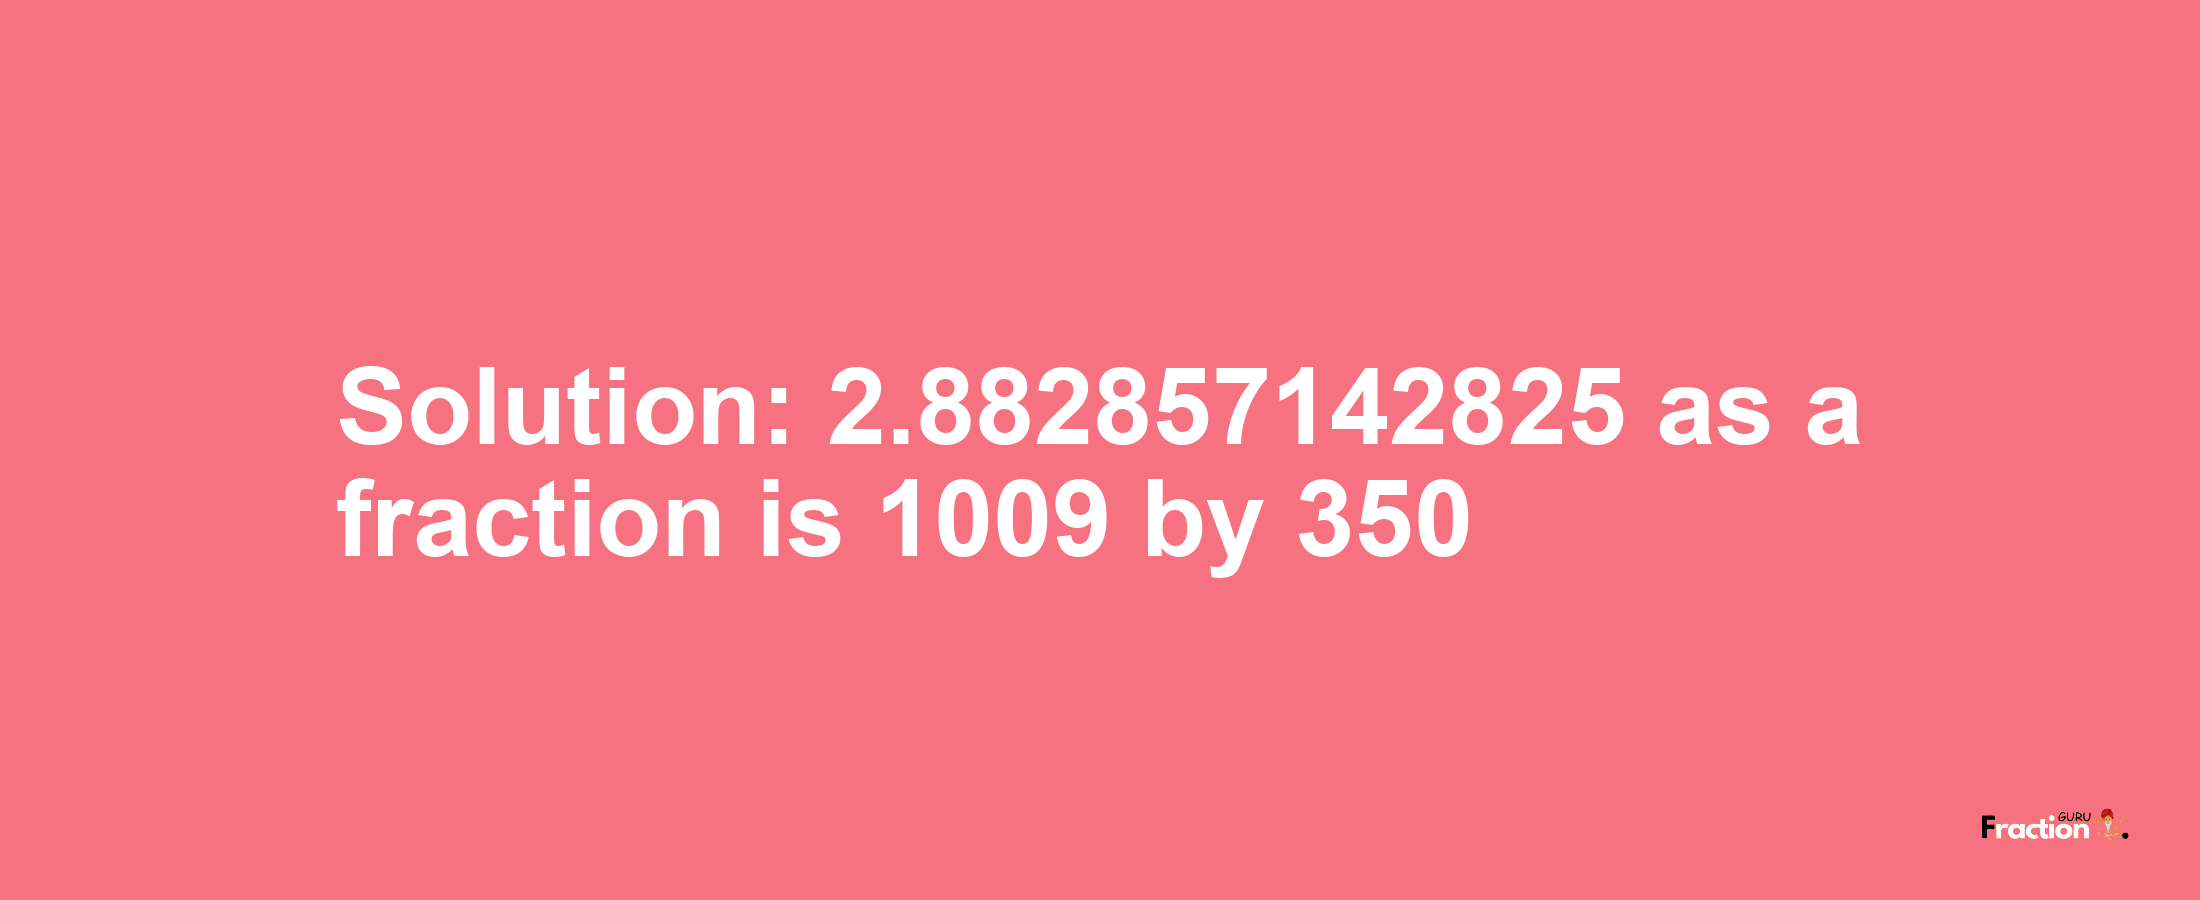 Solution:2.882857142825 as a fraction is 1009/350